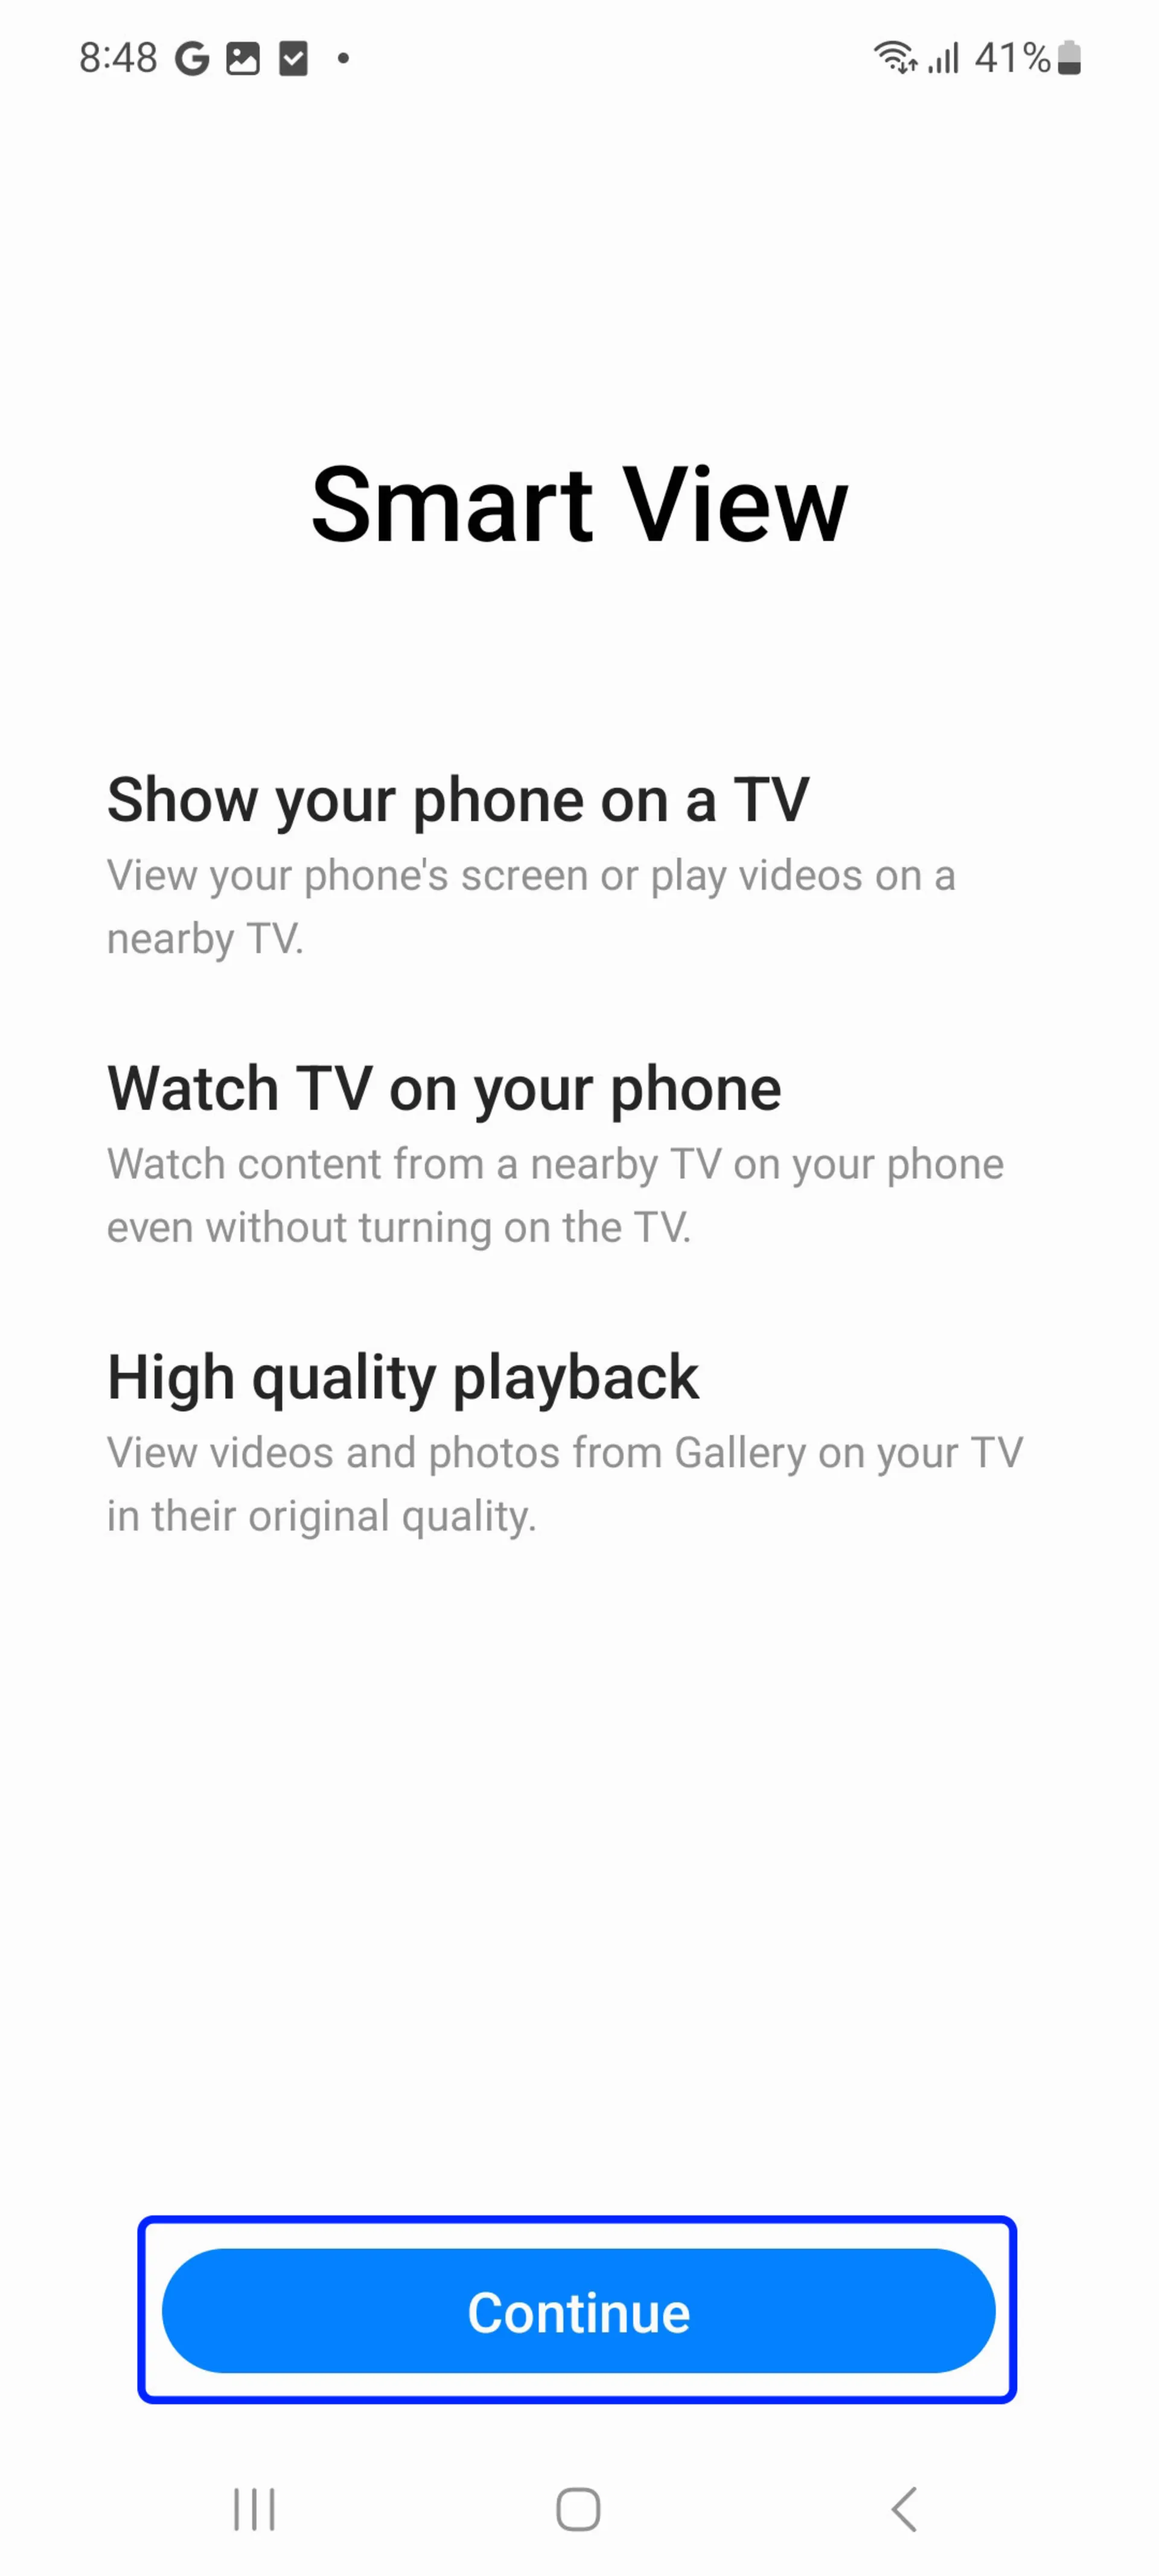 Steps to connect Samsung phone to Samsung TV